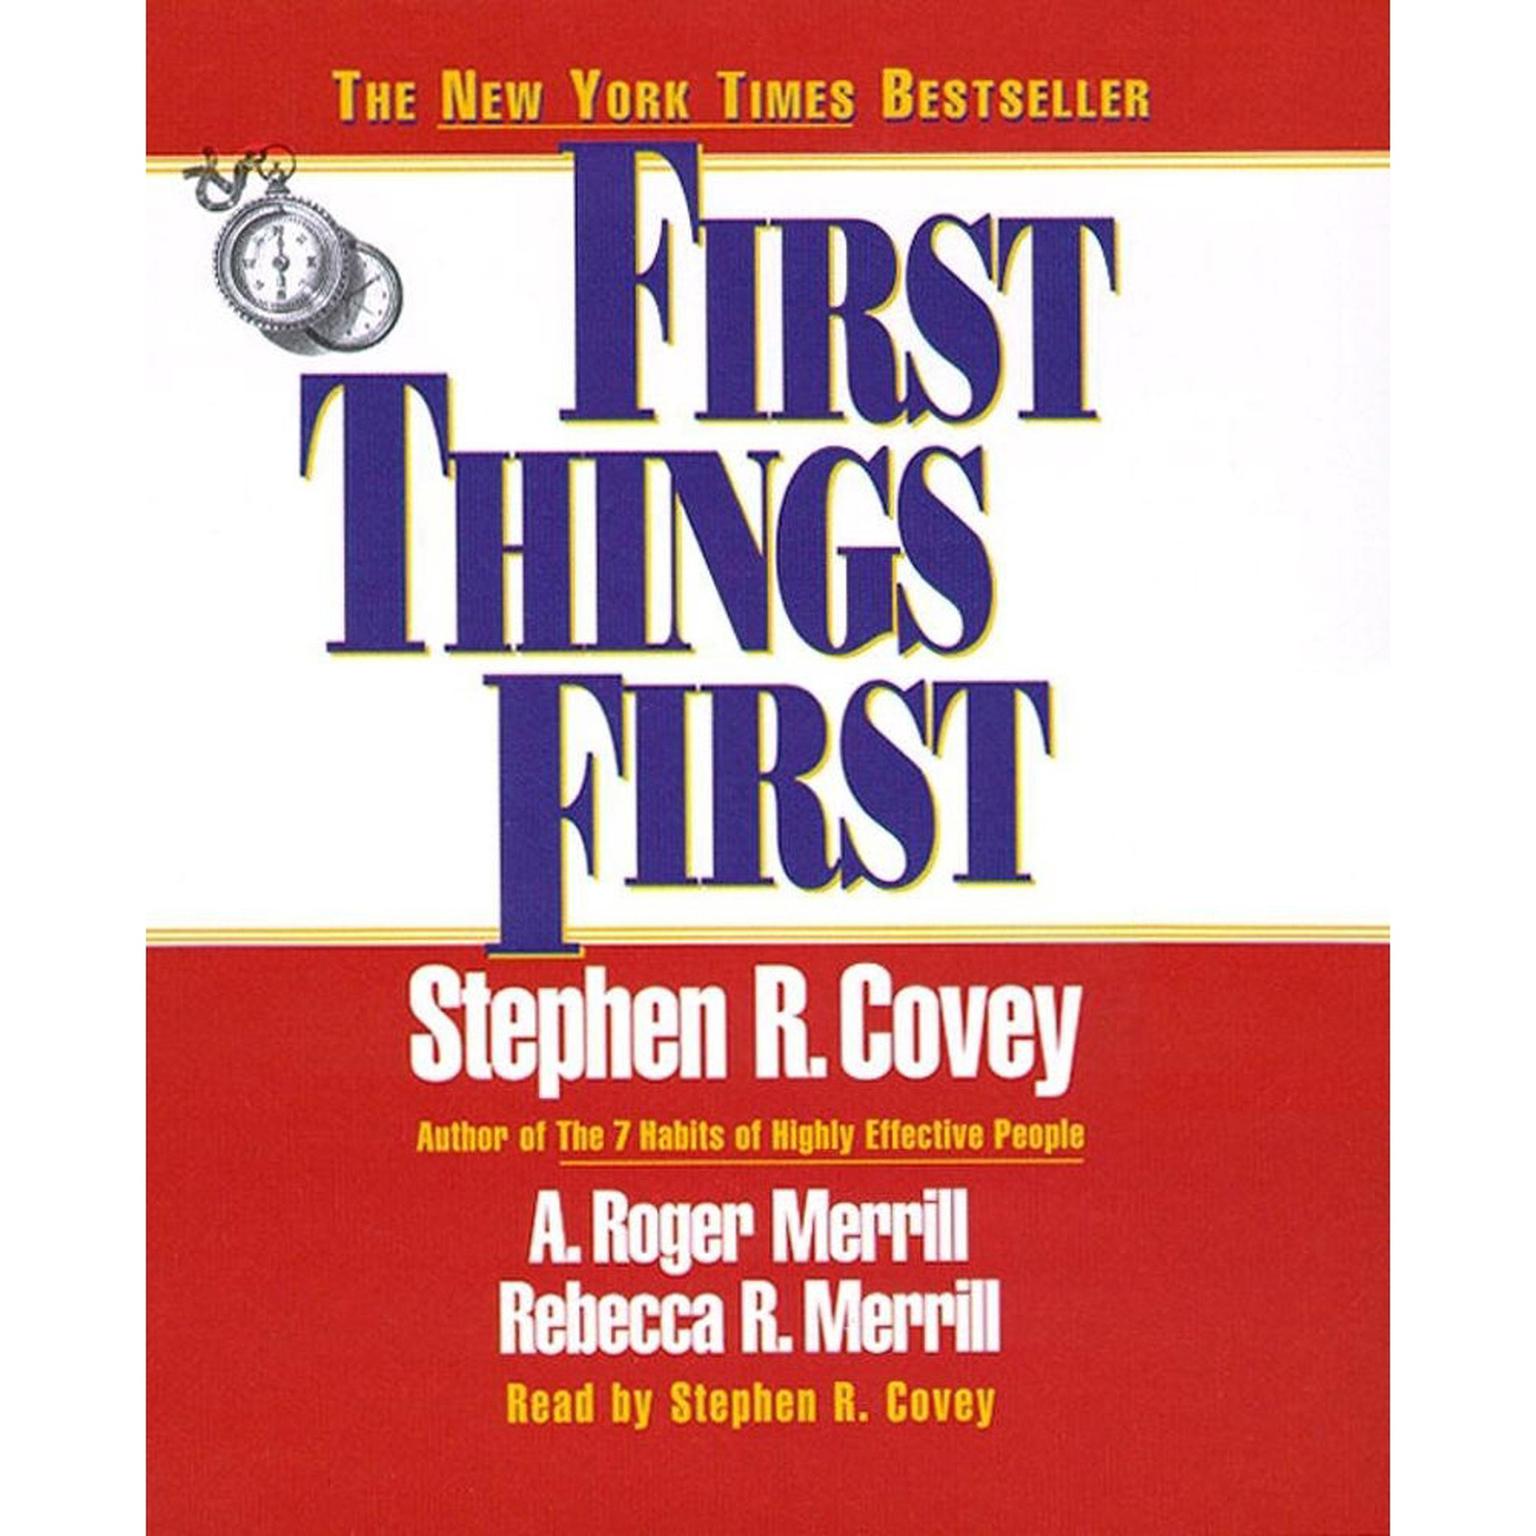 First Things First (Abridged): Understand Why So Often Our First Things Arent First Audiobook, by Stephen R. Covey